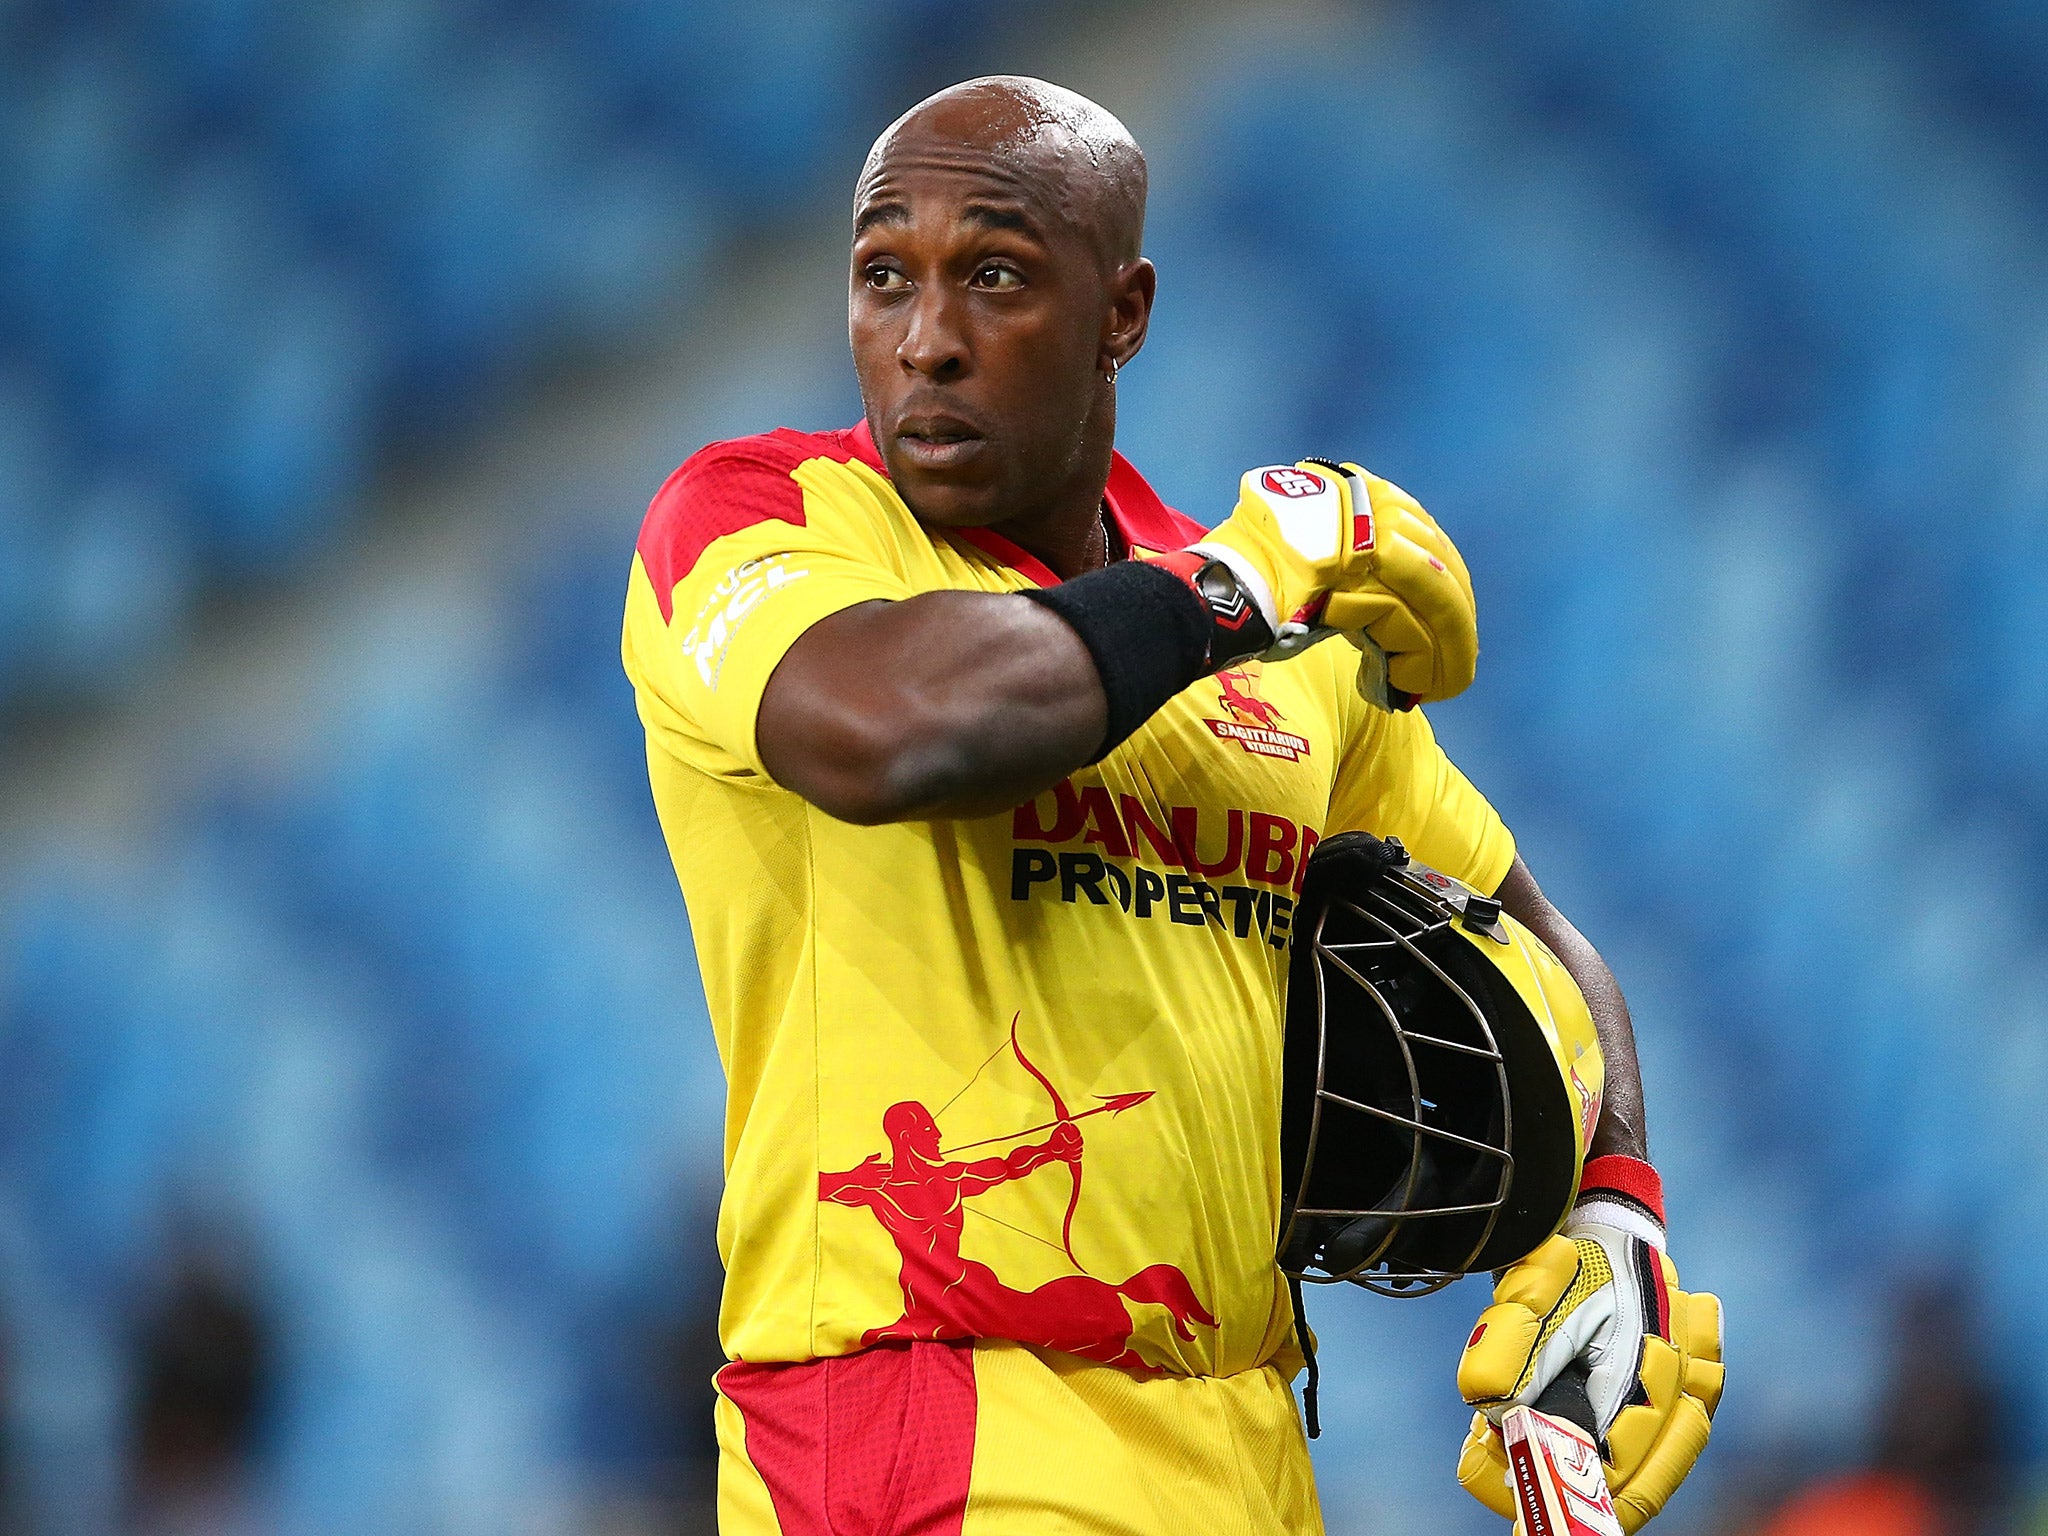 Michael Carberry has been diagnosed with cancer